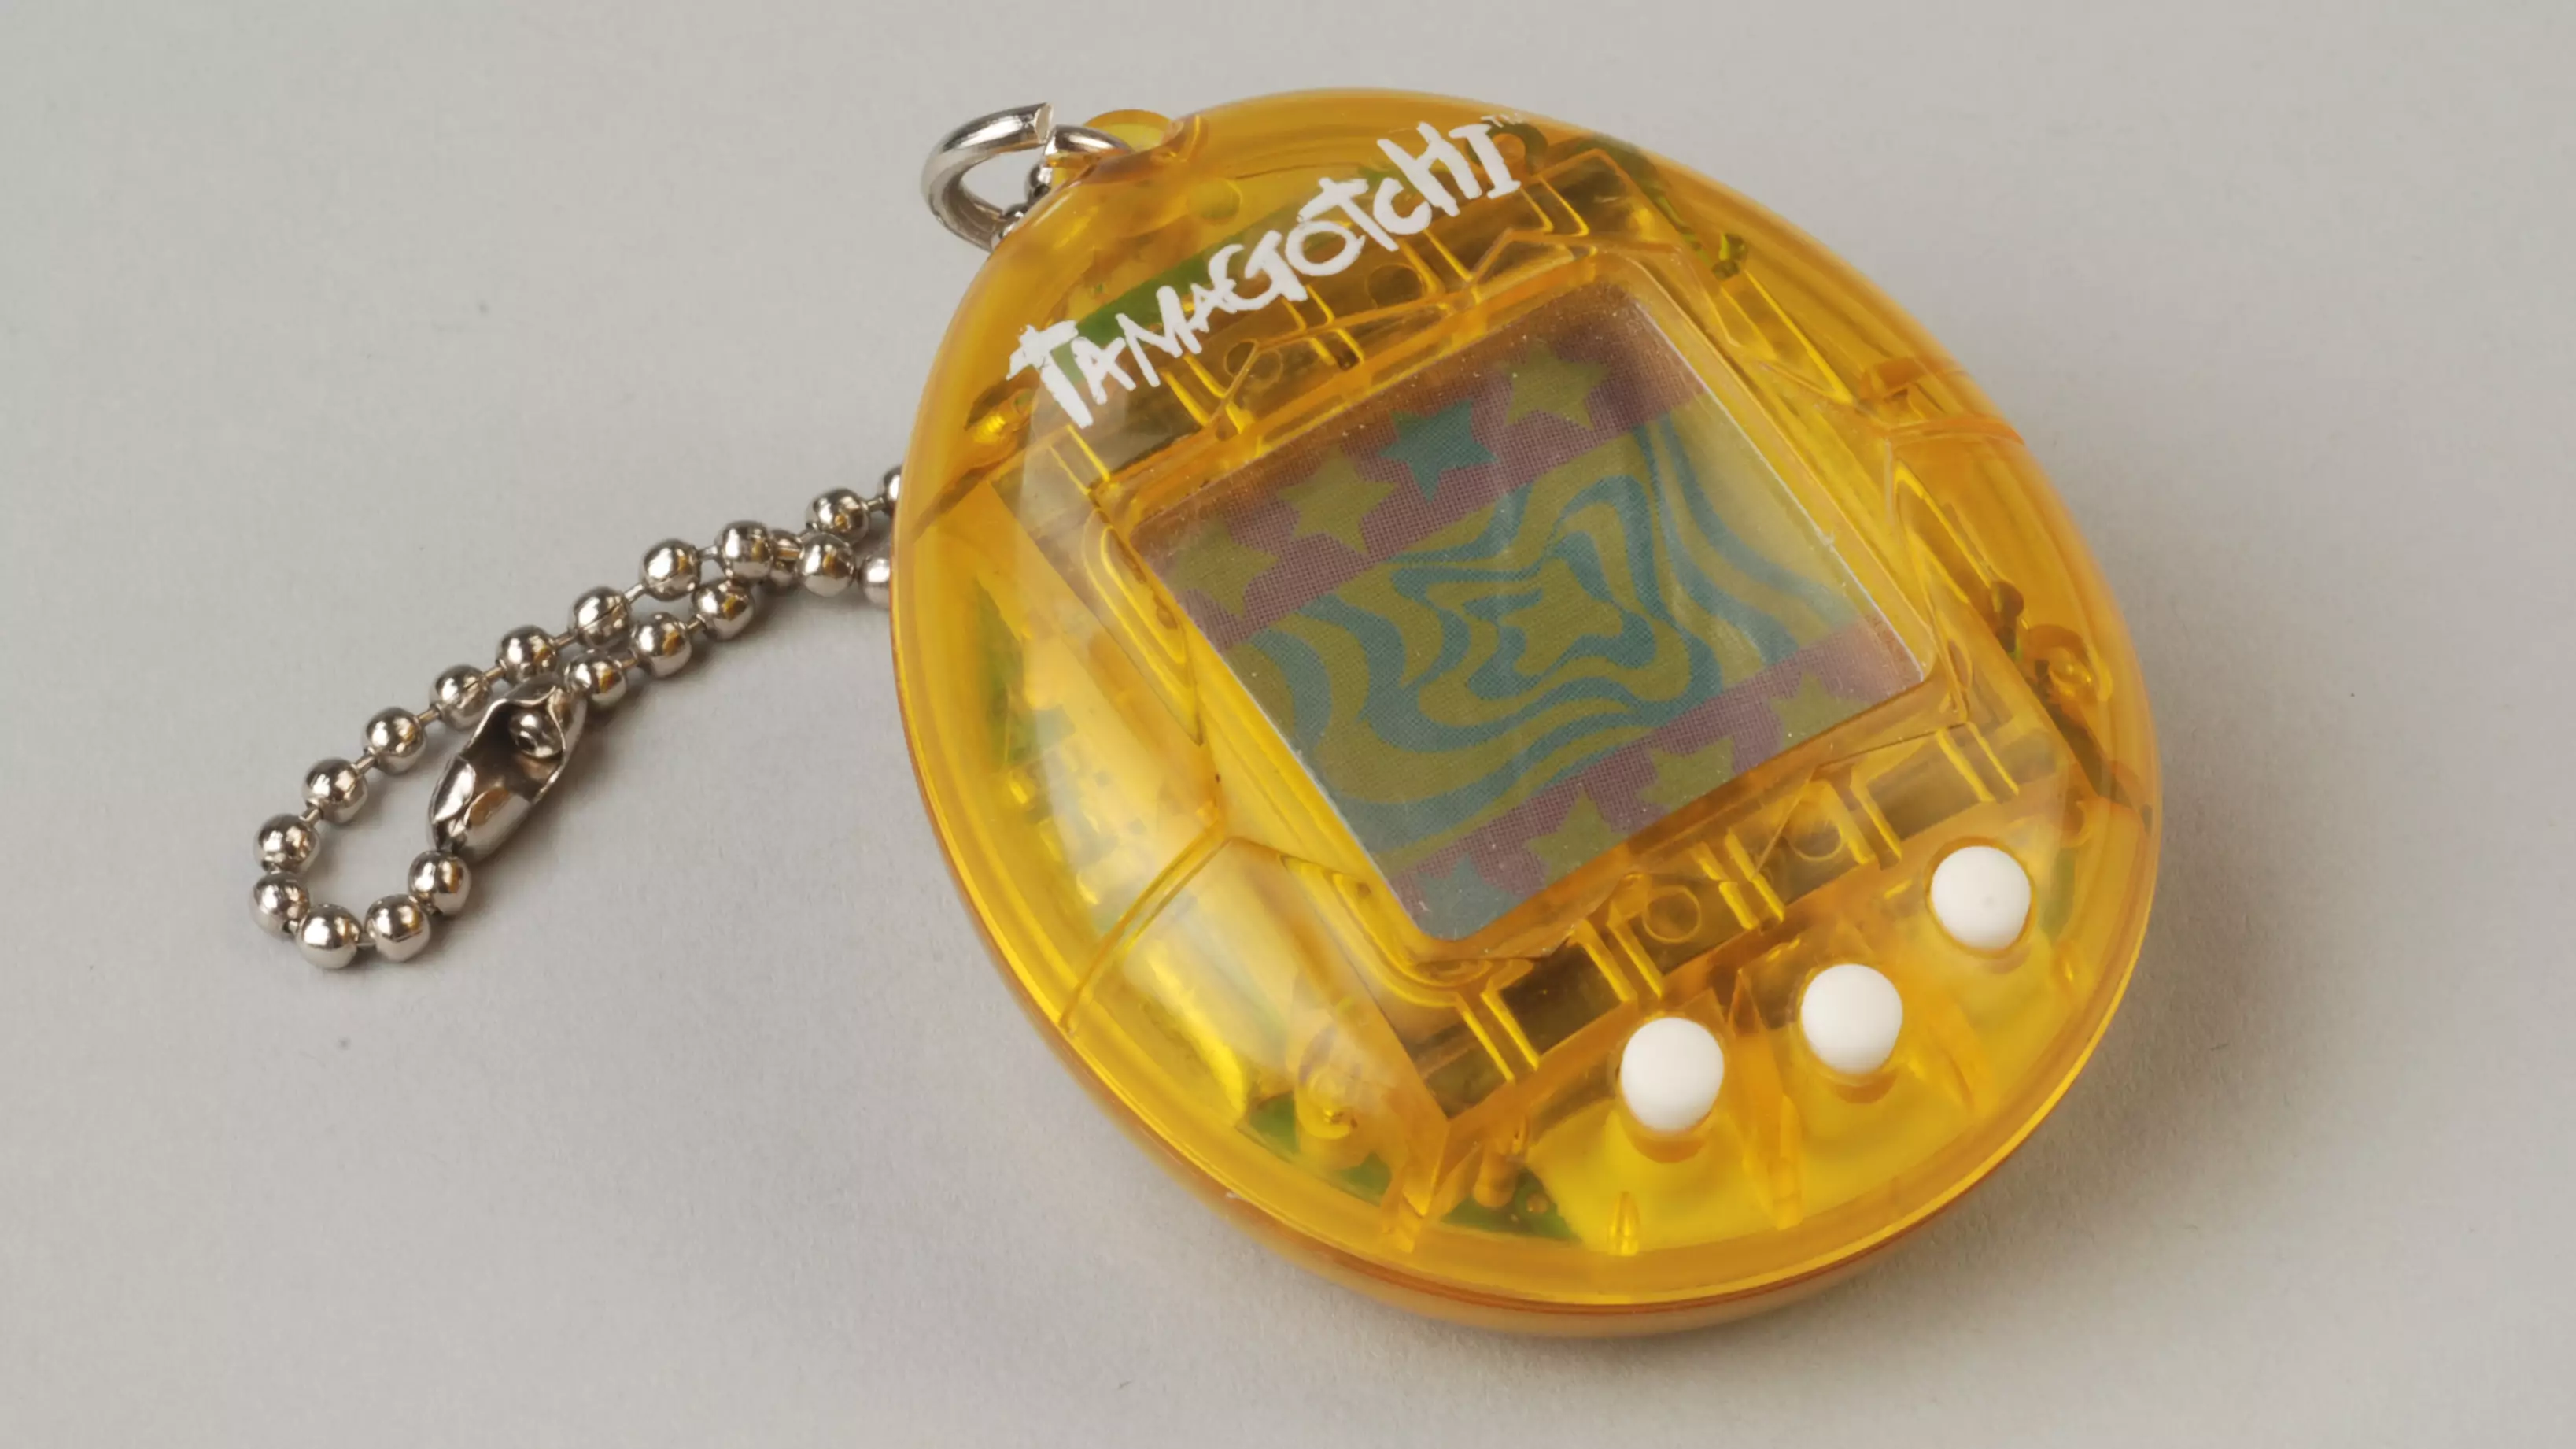 Teacher Returns Tamagotchi-Style Device 21 Years After Confiscating It